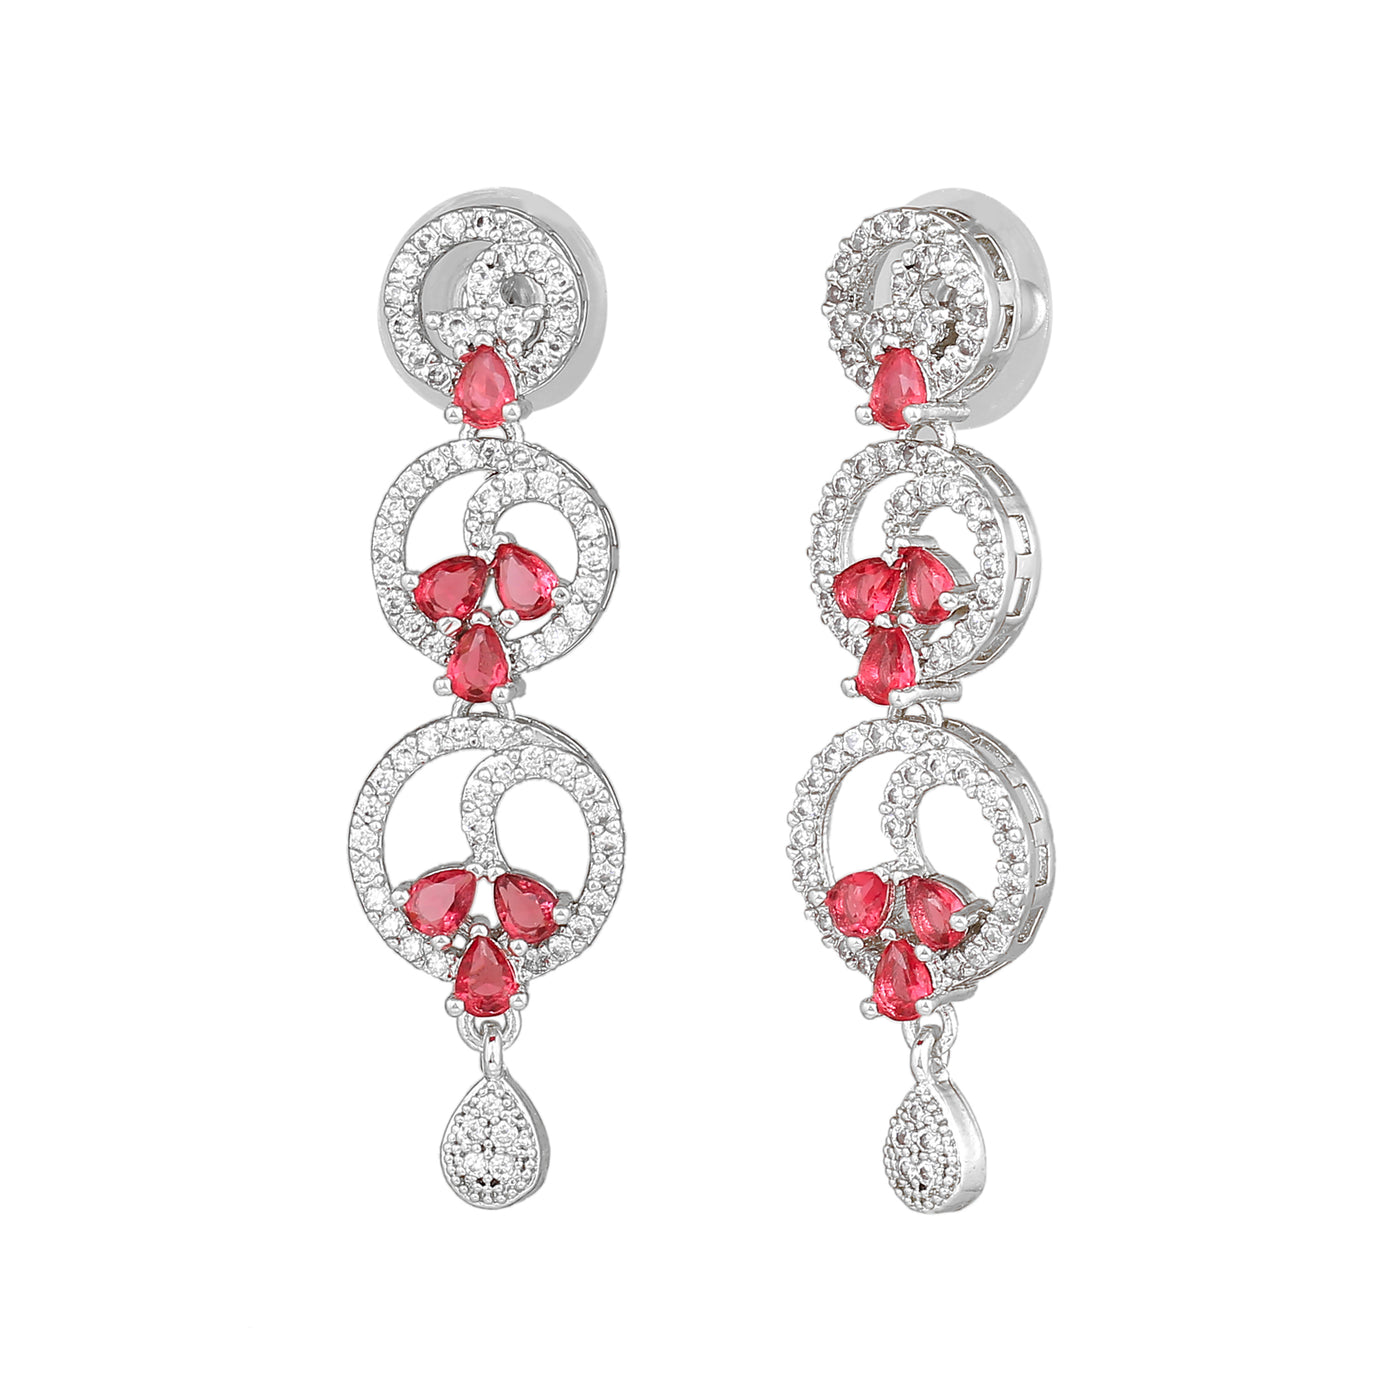 Estele Rhodium Plated CZ Fascinating Earrings with Tourmaline Pink Stones for Women